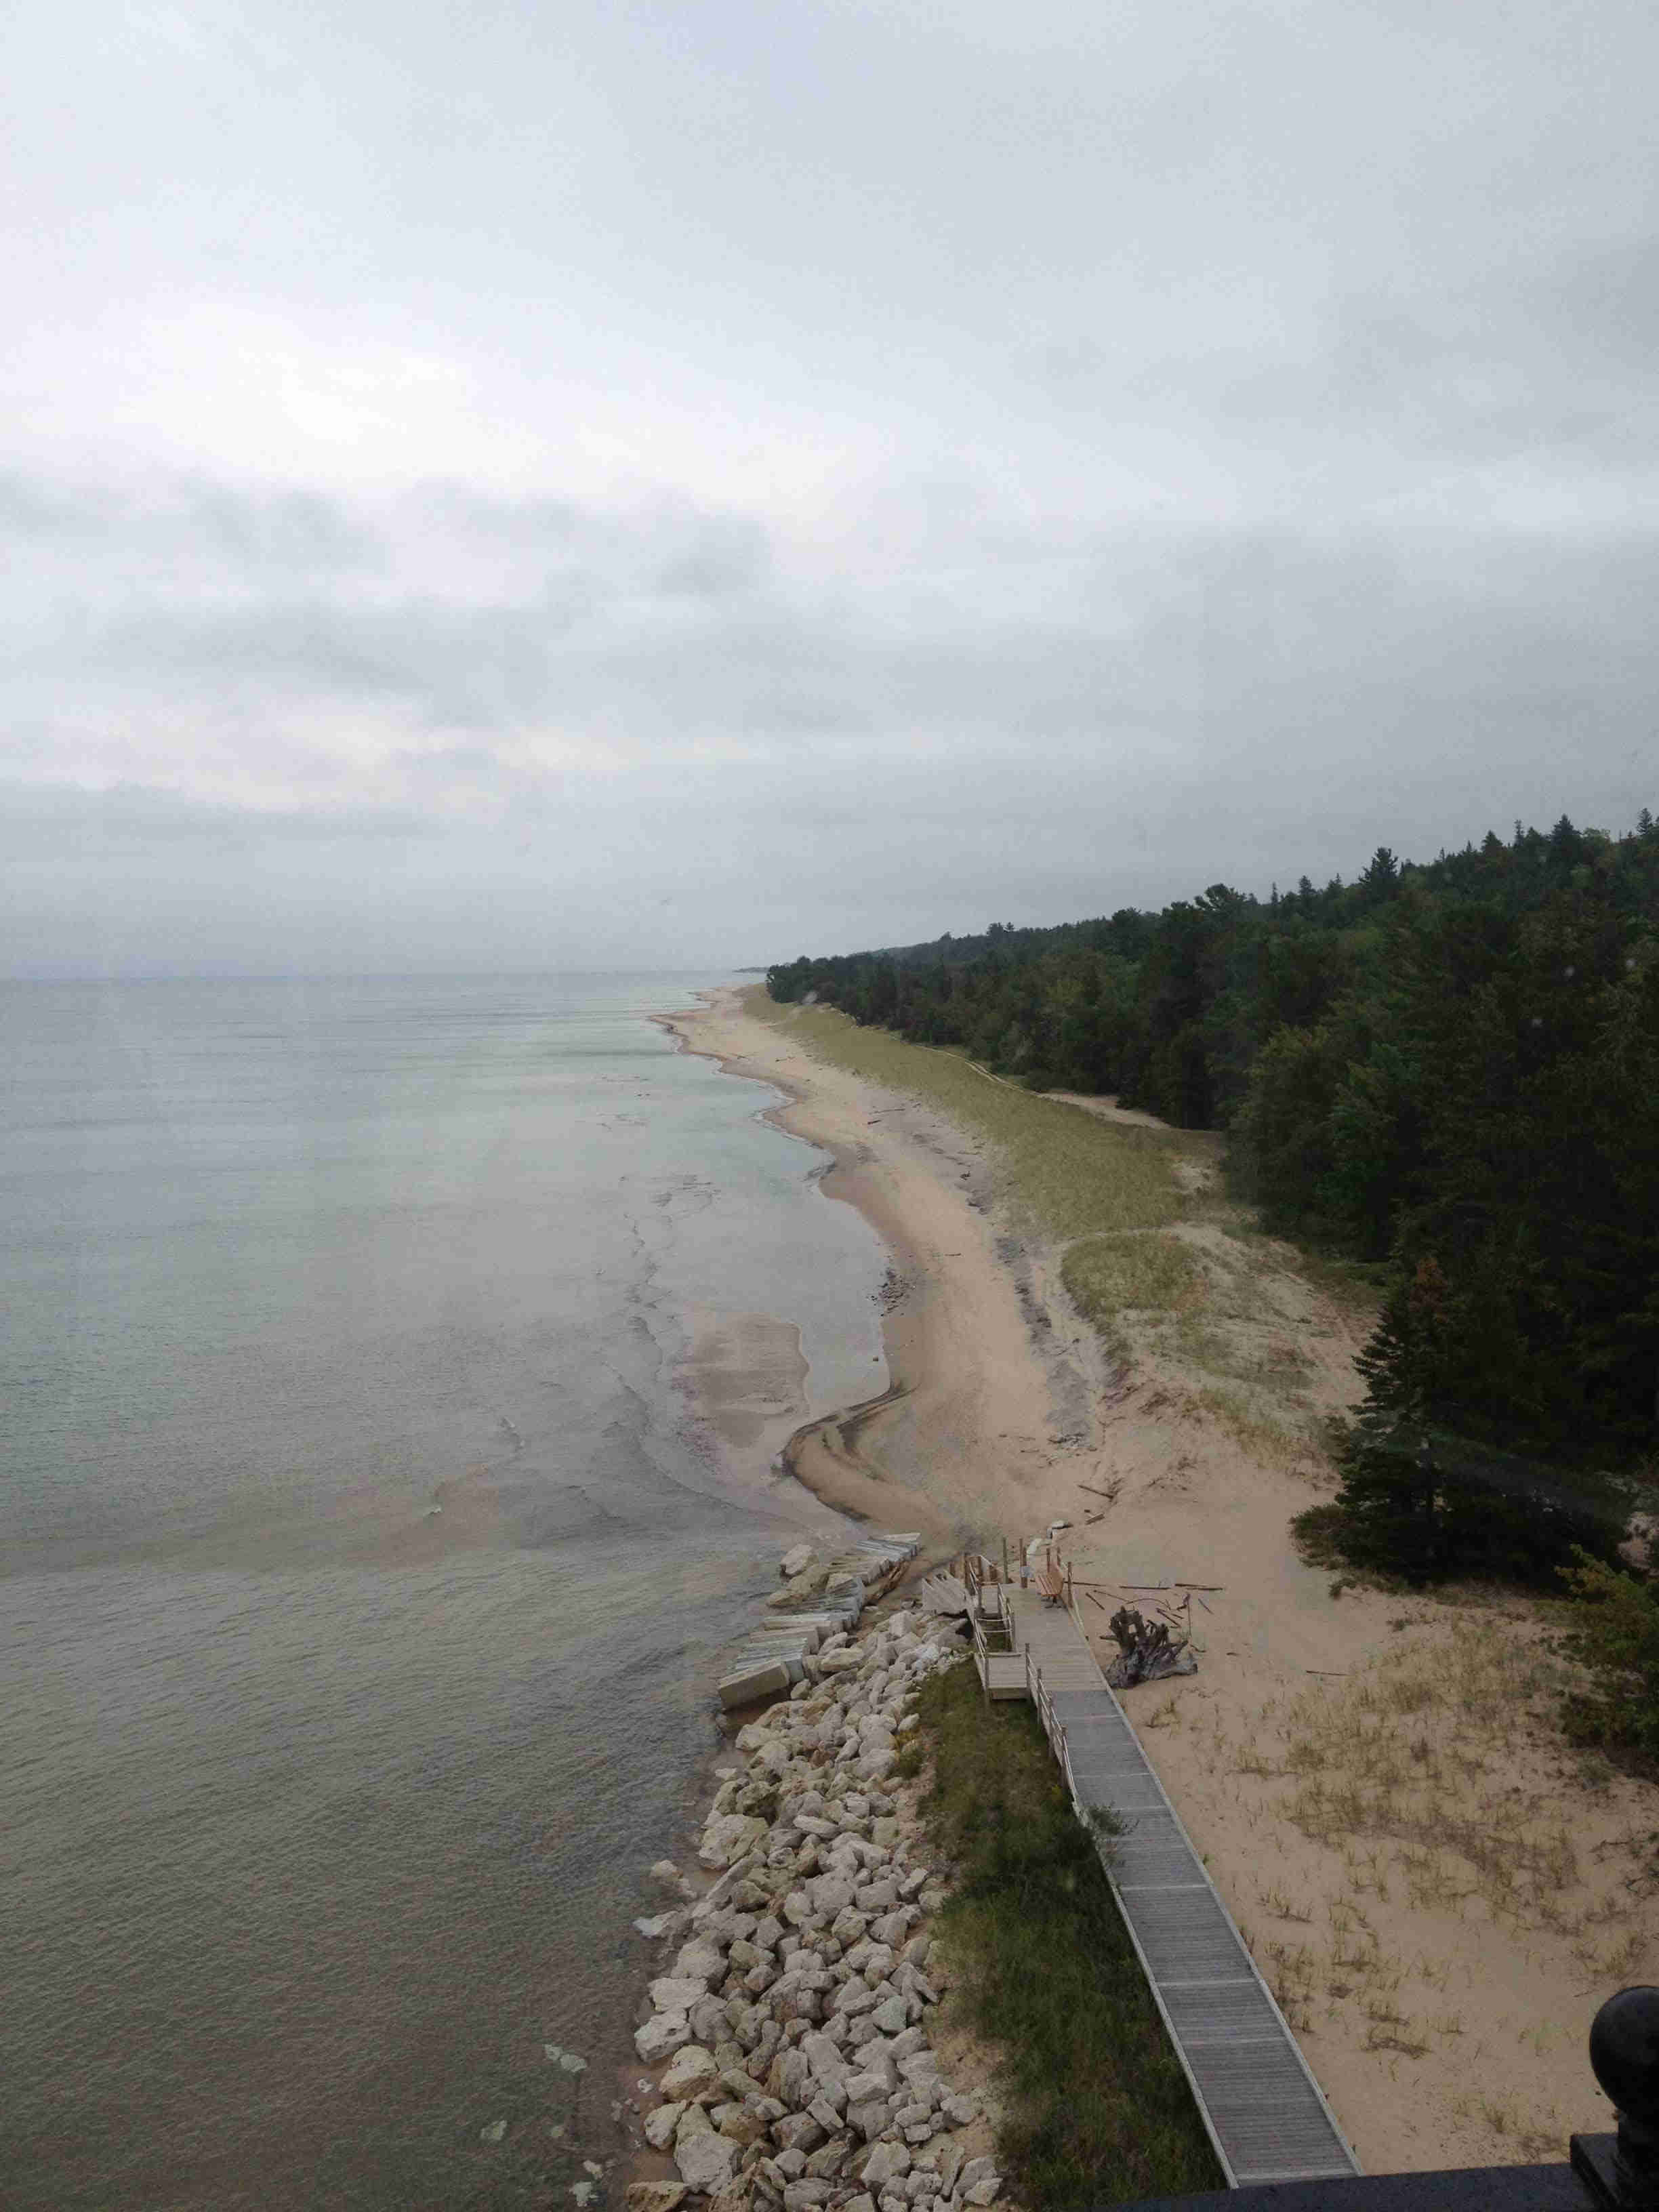 A view of above a rocky and sandy shore with a wood deck alongside, with water on the left, and trees on the right